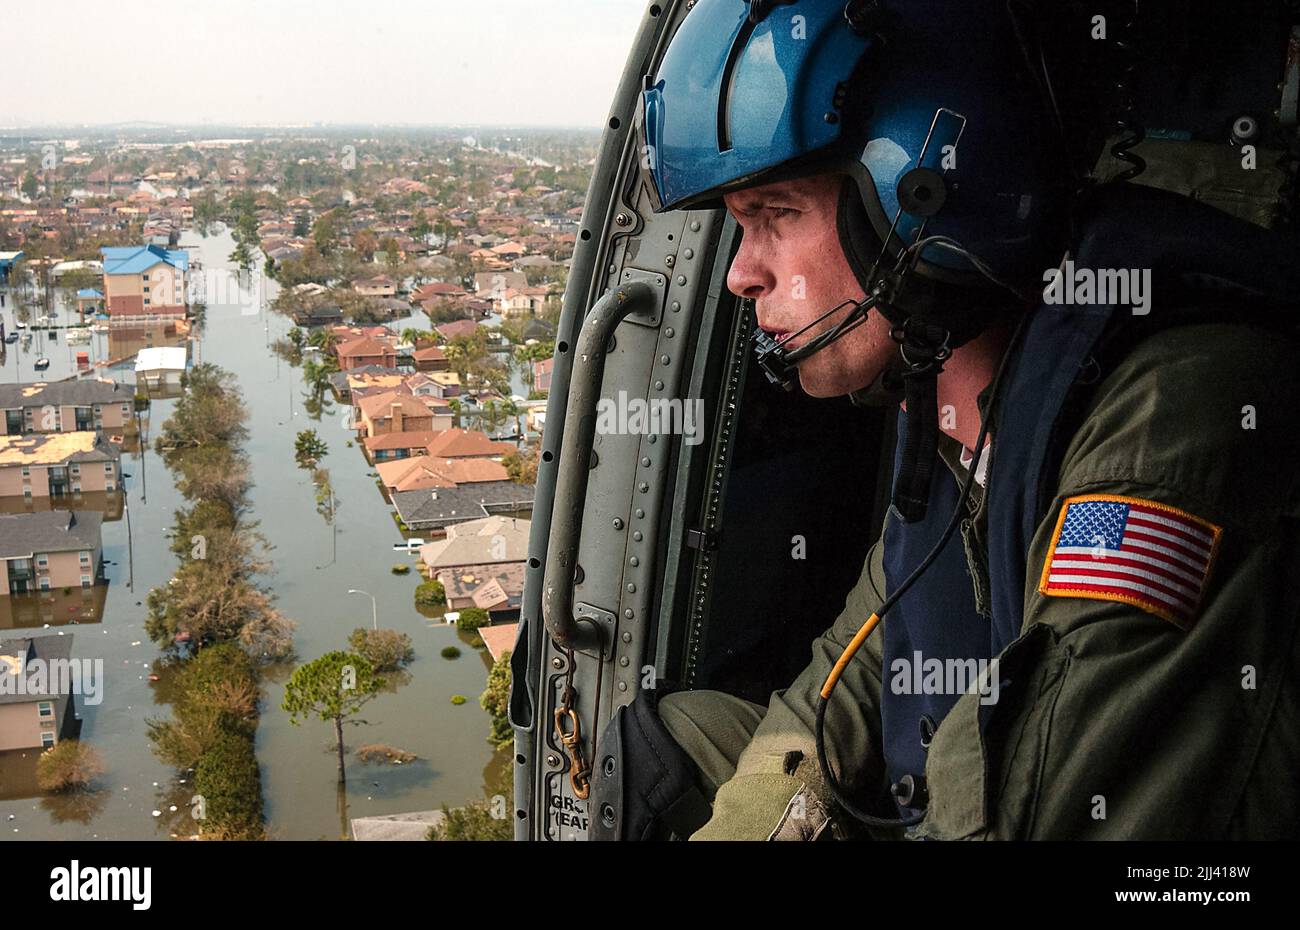 Shawn Beaty of the U.S. Coast Guard looks for survivors in the wake of Hurricane Katrina in New Orleans, Louisiana, on August 30, 2005. Beaty, 29, of Long Island, New York, is a member of a Coast Guard HH-60 Jayhawk helicopter rescue crew sent from Clearwater, Florida, to assist in search and rescue efforts. Stock Photo